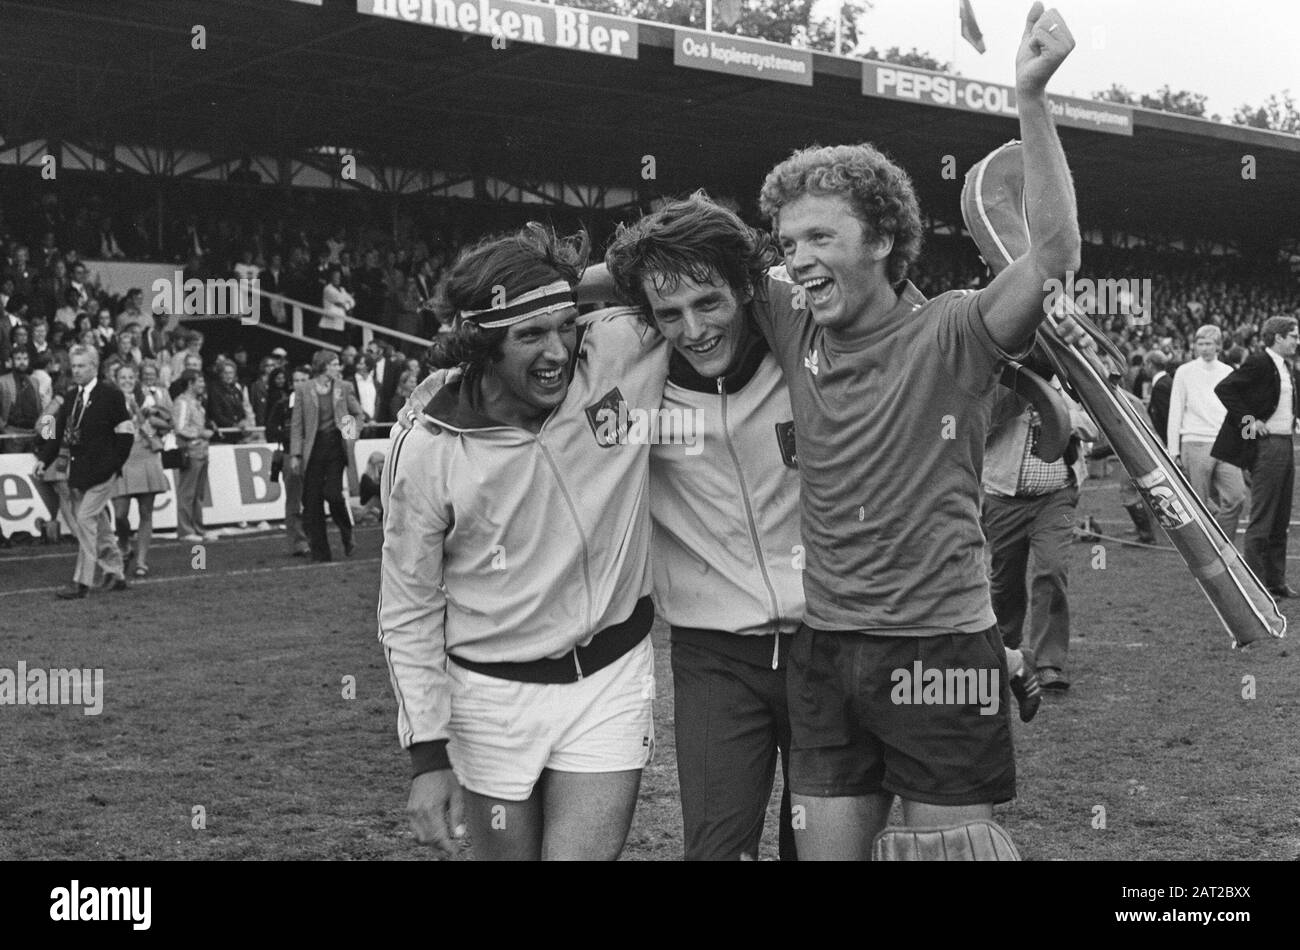 World Cup Hockey in Amstelveen, final, Netherlands against India, number 29 Ties Kruize, number 30 and 31 Ties kruize (right) and Maarten Sikking/Date: September 2, 1973 Location: Amstelveen, Noord-Holland Keywords: hockey Person name: Sikking, Maarten Stock Photo